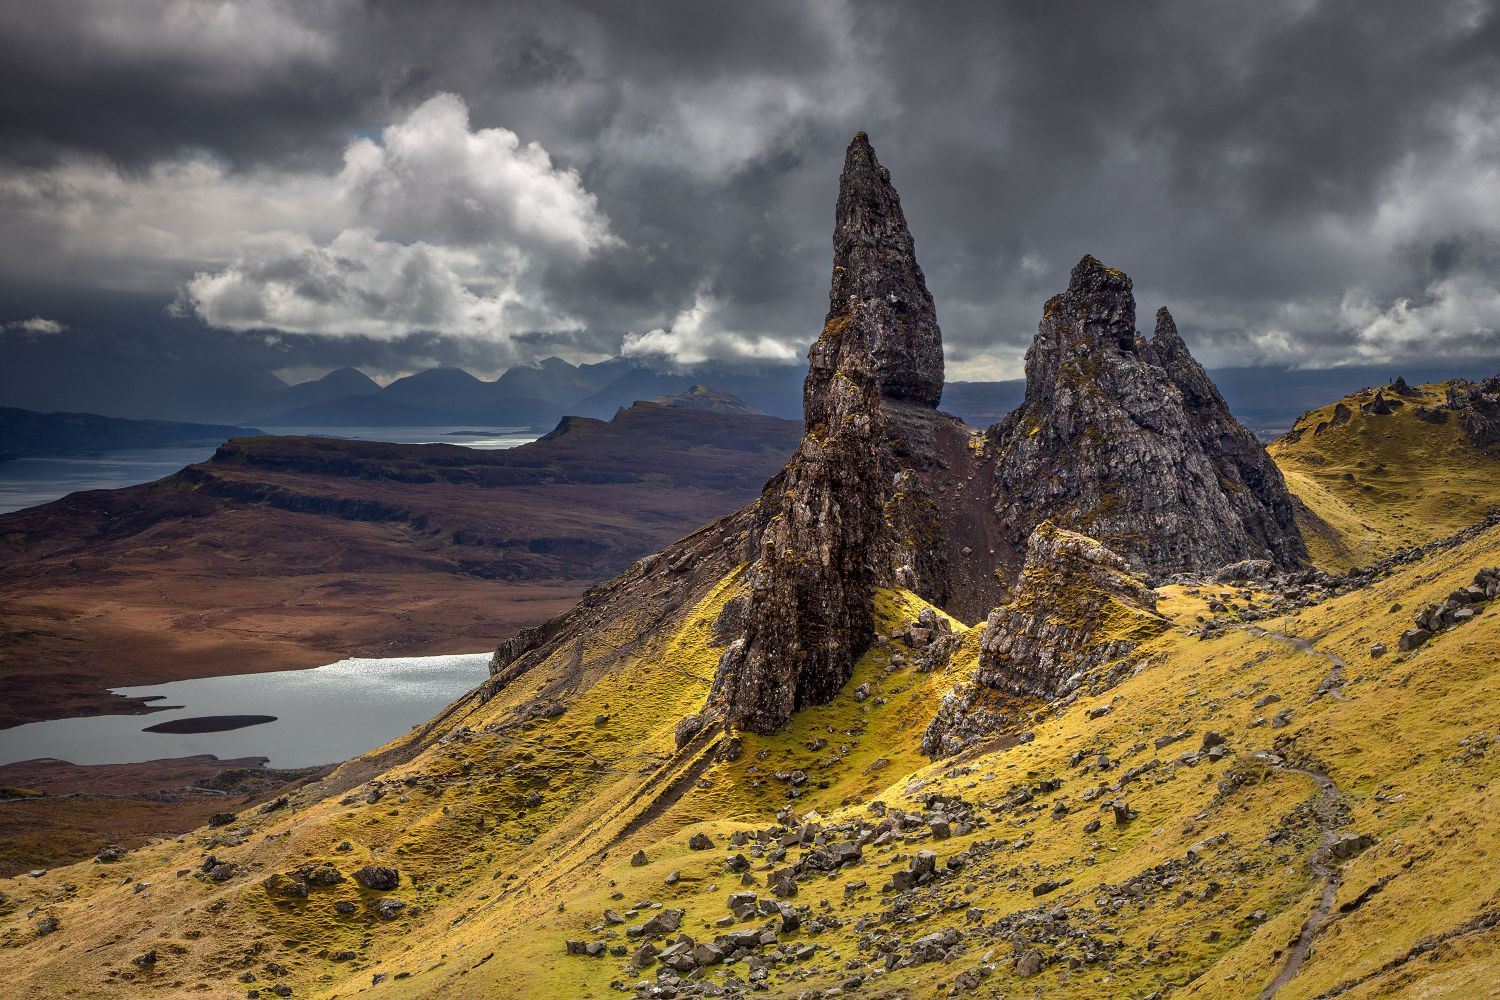 The Old Man of Storr by Martin Lawrence